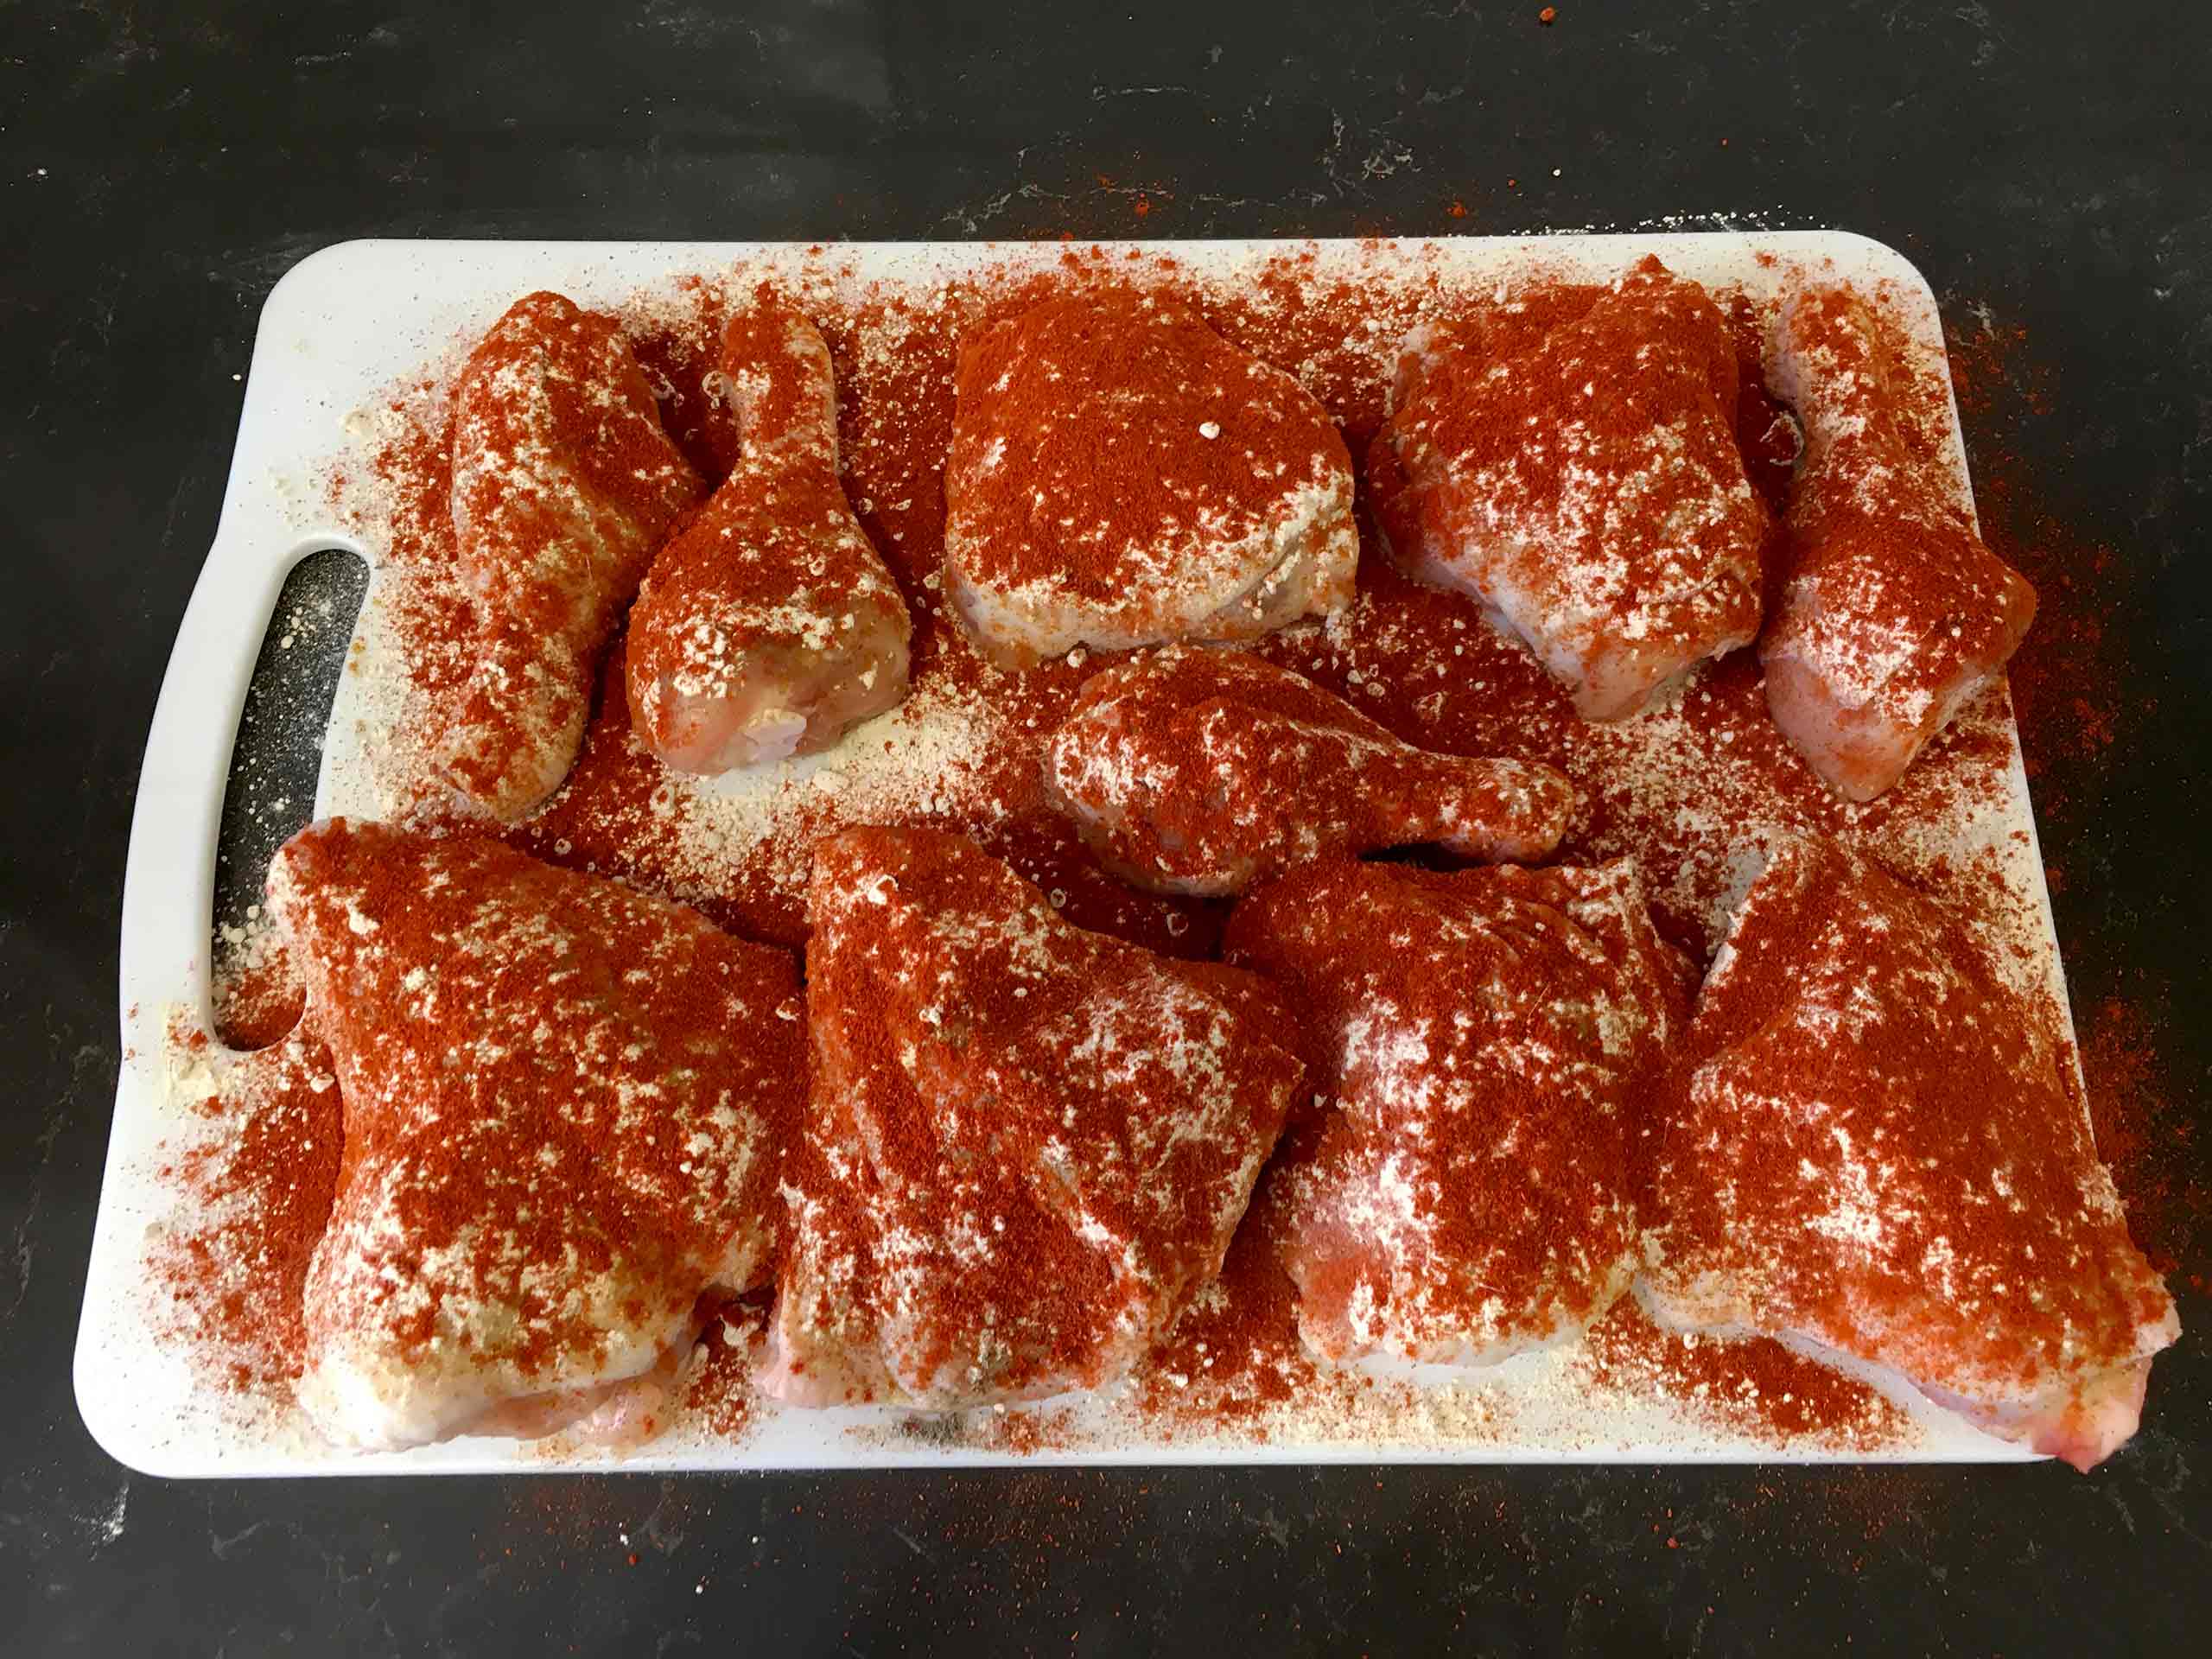 Season the chicken with a nice layer of sweet paprika. be generous.